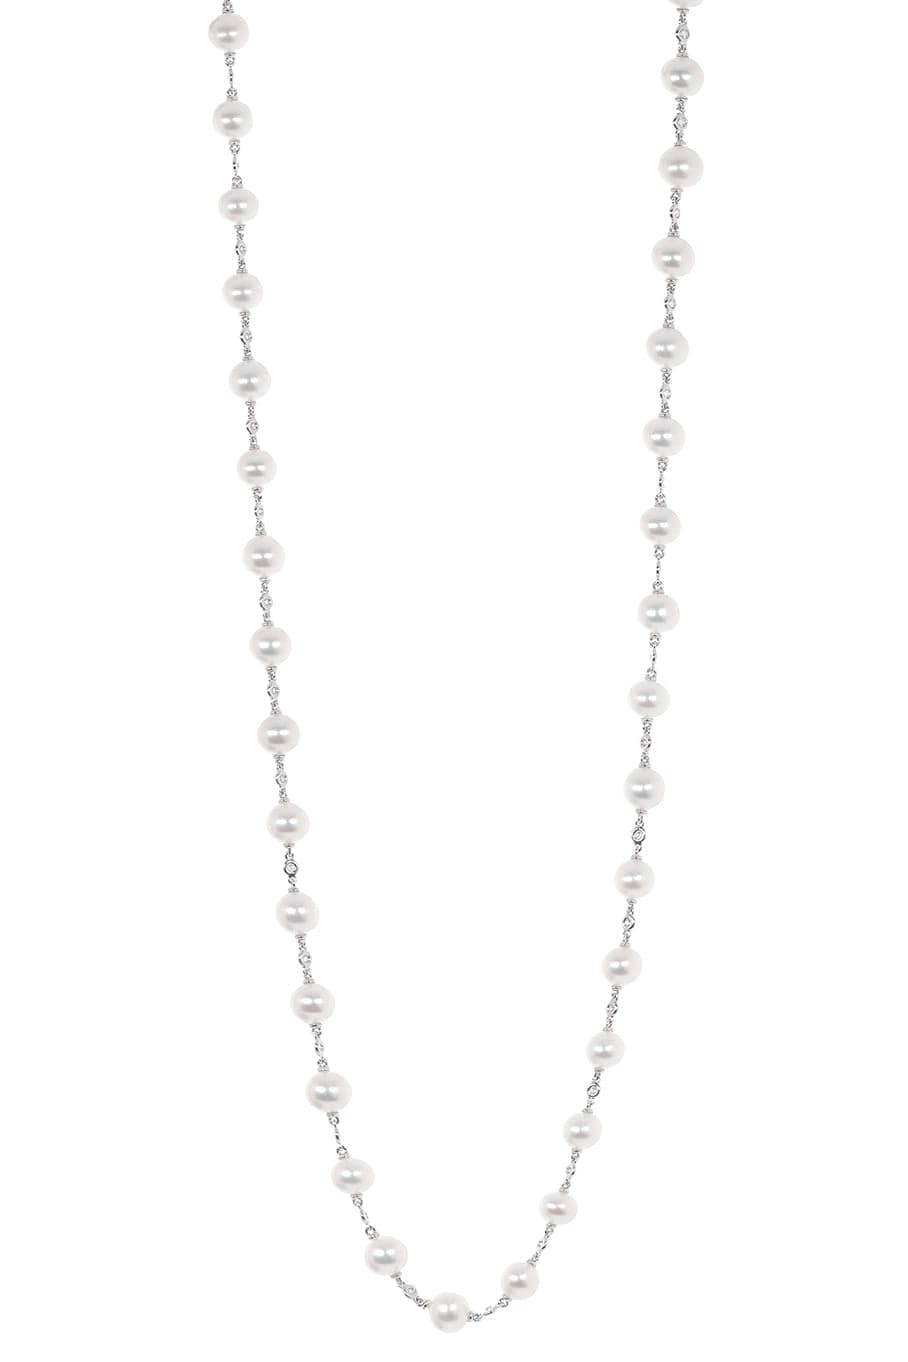 SIDNEY GARBER-Pearl and Diamond Triple Necklace-WHITE GOLD